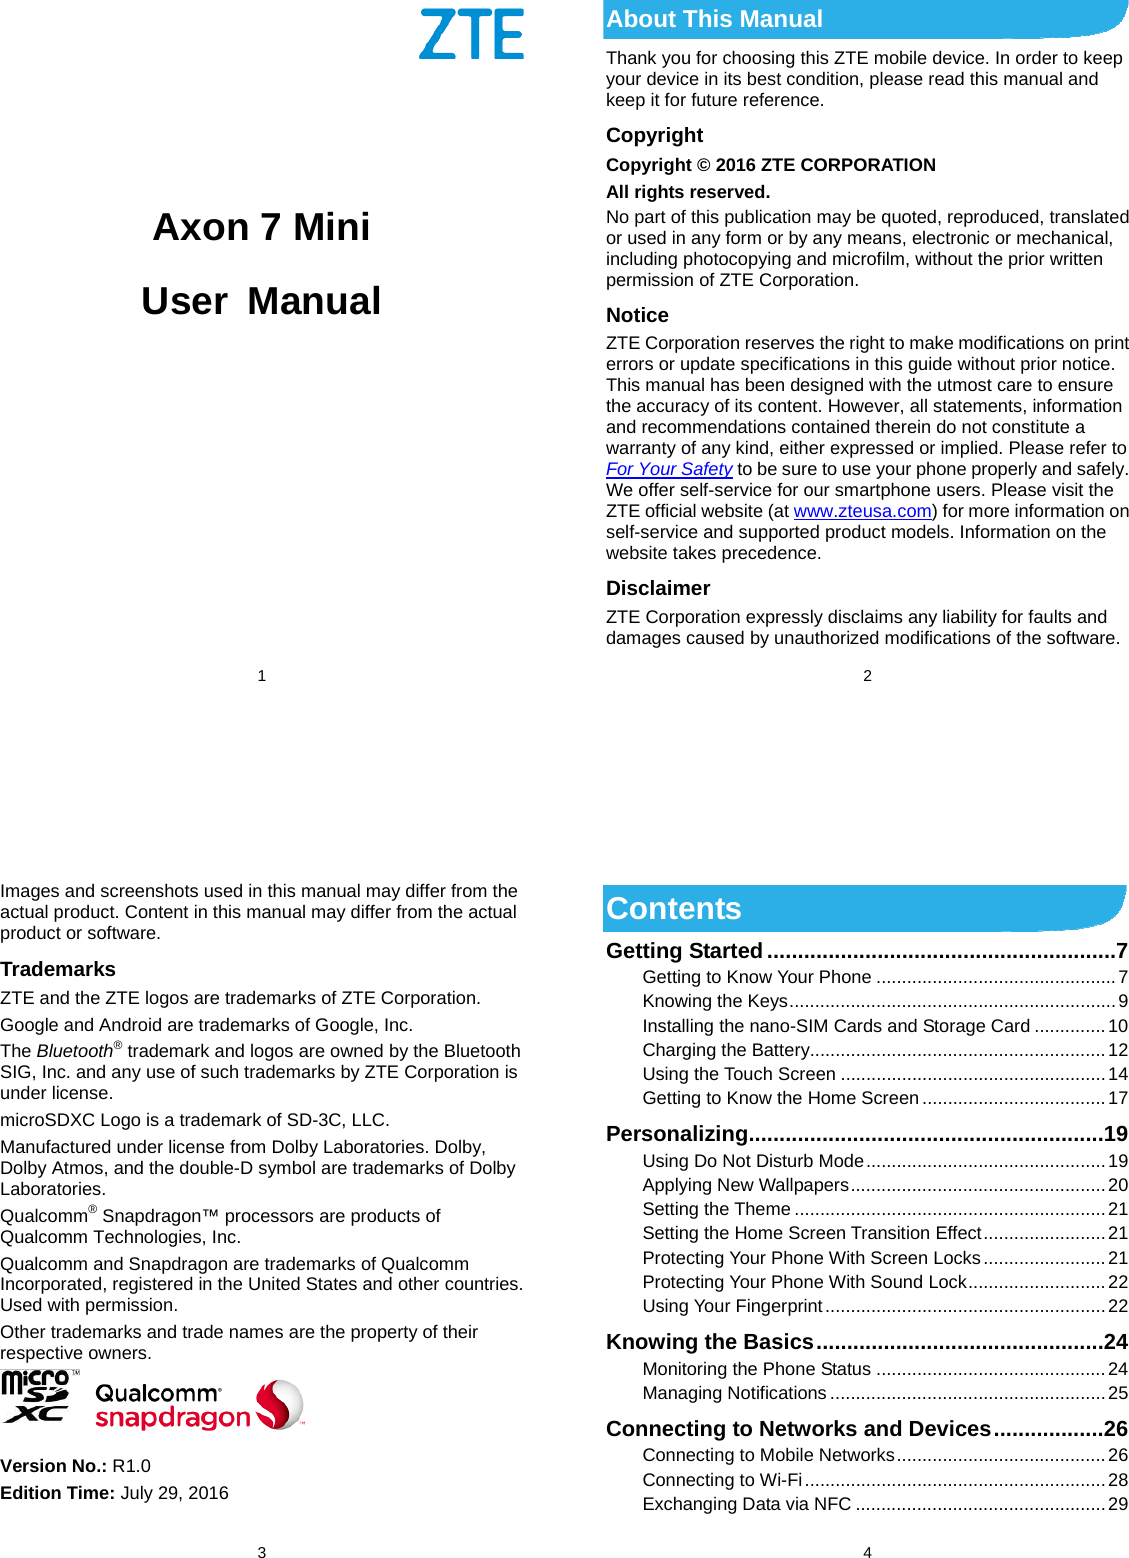  1           Axon 7 Mini User Manual     2 About This Manual Thank you for choosing this ZTE mobile device. In order to keep your device in its best condition, please read this manual and keep it for future reference. Copyright Copyright © 2016 ZTE CORPORATION All rights reserved. No part of this publication may be quoted, reproduced, translated or used in any form or by any means, electronic or mechanical, including photocopying and microfilm, without the prior written permission of ZTE Corporation. Notice ZTE Corporation reserves the right to make modifications on print errors or update specifications in this guide without prior notice. This manual has been designed with the utmost care to ensure the accuracy of its content. However, all statements, information and recommendations contained therein do not constitute a warranty of any kind, either expressed or implied. Please refer to For Your Safety to be sure to use your phone properly and safely. We offer self-service for our smartphone users. Please visit the ZTE official website (at www.zteusa.com) for more information on self-service and supported product models. Information on the website takes precedence. Disclaimer ZTE Corporation expressly disclaims any liability for faults and damages caused by unauthorized modifications of the software.  3 Images and screenshots used in this manual may differ from the actual product. Content in this manual may differ from the actual product or software. Trademarks ZTE and the ZTE logos are trademarks of ZTE Corporation. Google and Android are trademarks of Google, Inc.   The Bluetooth® trademark and logos are owned by the Bluetooth SIG, Inc. and any use of such trademarks by ZTE Corporation is under license.   microSDXC Logo is a trademark of SD-3C, LLC. Manufactured under license from Dolby Laboratories. Dolby, Dolby Atmos, and the double-D symbol are trademarks of Dolby Laboratories. Qualcomm® Snapdragon™ processors are products of Qualcomm Technologies, Inc.   Qualcomm and Snapdragon are trademarks of Qualcomm Incorporated, registered in the United States and other countries. Used with permission. Other trademarks and trade names are the property of their respective owners.   Version No.: R1.0 Edition Time: July 29, 2016  4 Contents Getting Started ......................................................... 7Getting to Know Your Phone ............................................... 7Knowing the Keys ................................................................ 9Installing the nano-SIM Cards and Storage Card .............. 10Charging the Battery.......................................................... 12Using the Touch Screen .................................................... 14Getting to Know the Home Screen .................................... 17Personalizing .......................................................... 19Using Do Not Disturb Mode ............................................... 19Applying New Wallpapers .................................................. 20Setting the Theme ............................................................. 21Setting the Home Screen Transition Effect ........................ 21Protecting Your Phone With Screen Locks ........................ 21Protecting Your Phone With Sound Lock ........................... 22Using Your Fingerprint ....................................................... 22Knowing the Basics ............................................... 24Monitoring the Phone Status ............................................. 24Managing Notifications ...................................................... 25Connecting to Networks and Devices .................. 26Connecting to Mobile Networks ......................................... 26Connecting to Wi-Fi ........................................................... 28Exchanging Data via NFC ................................................. 29